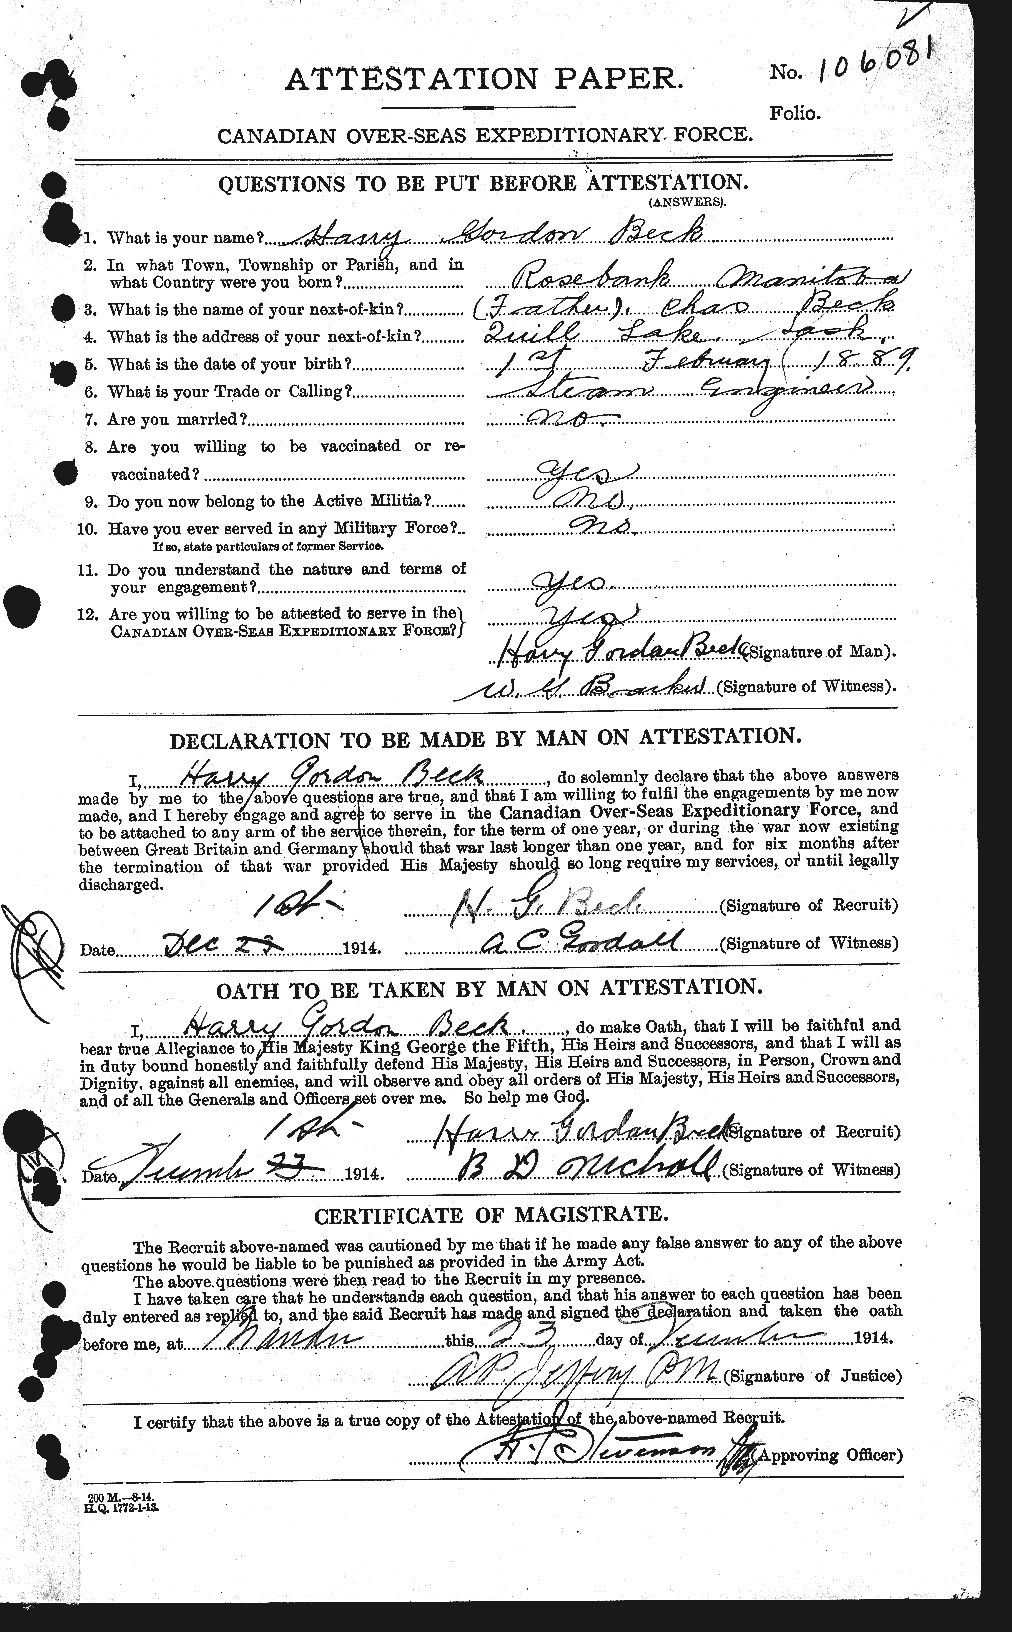 Personnel Records of the First World War - CEF 232127a